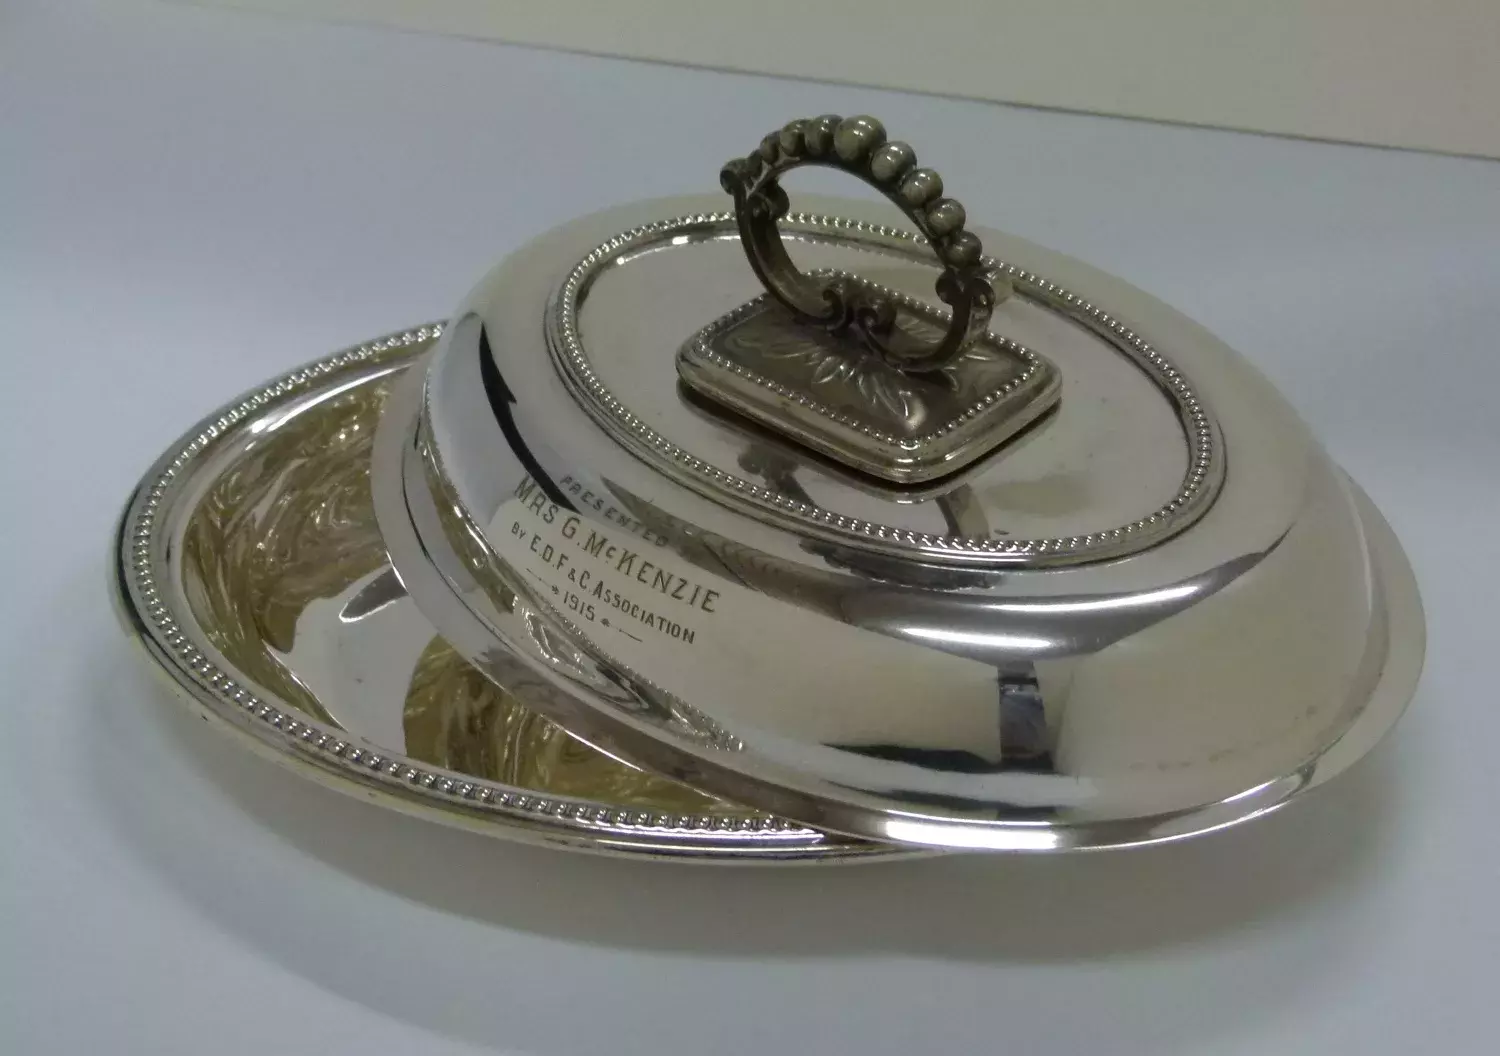 A silver cooking dish with an engraving.  